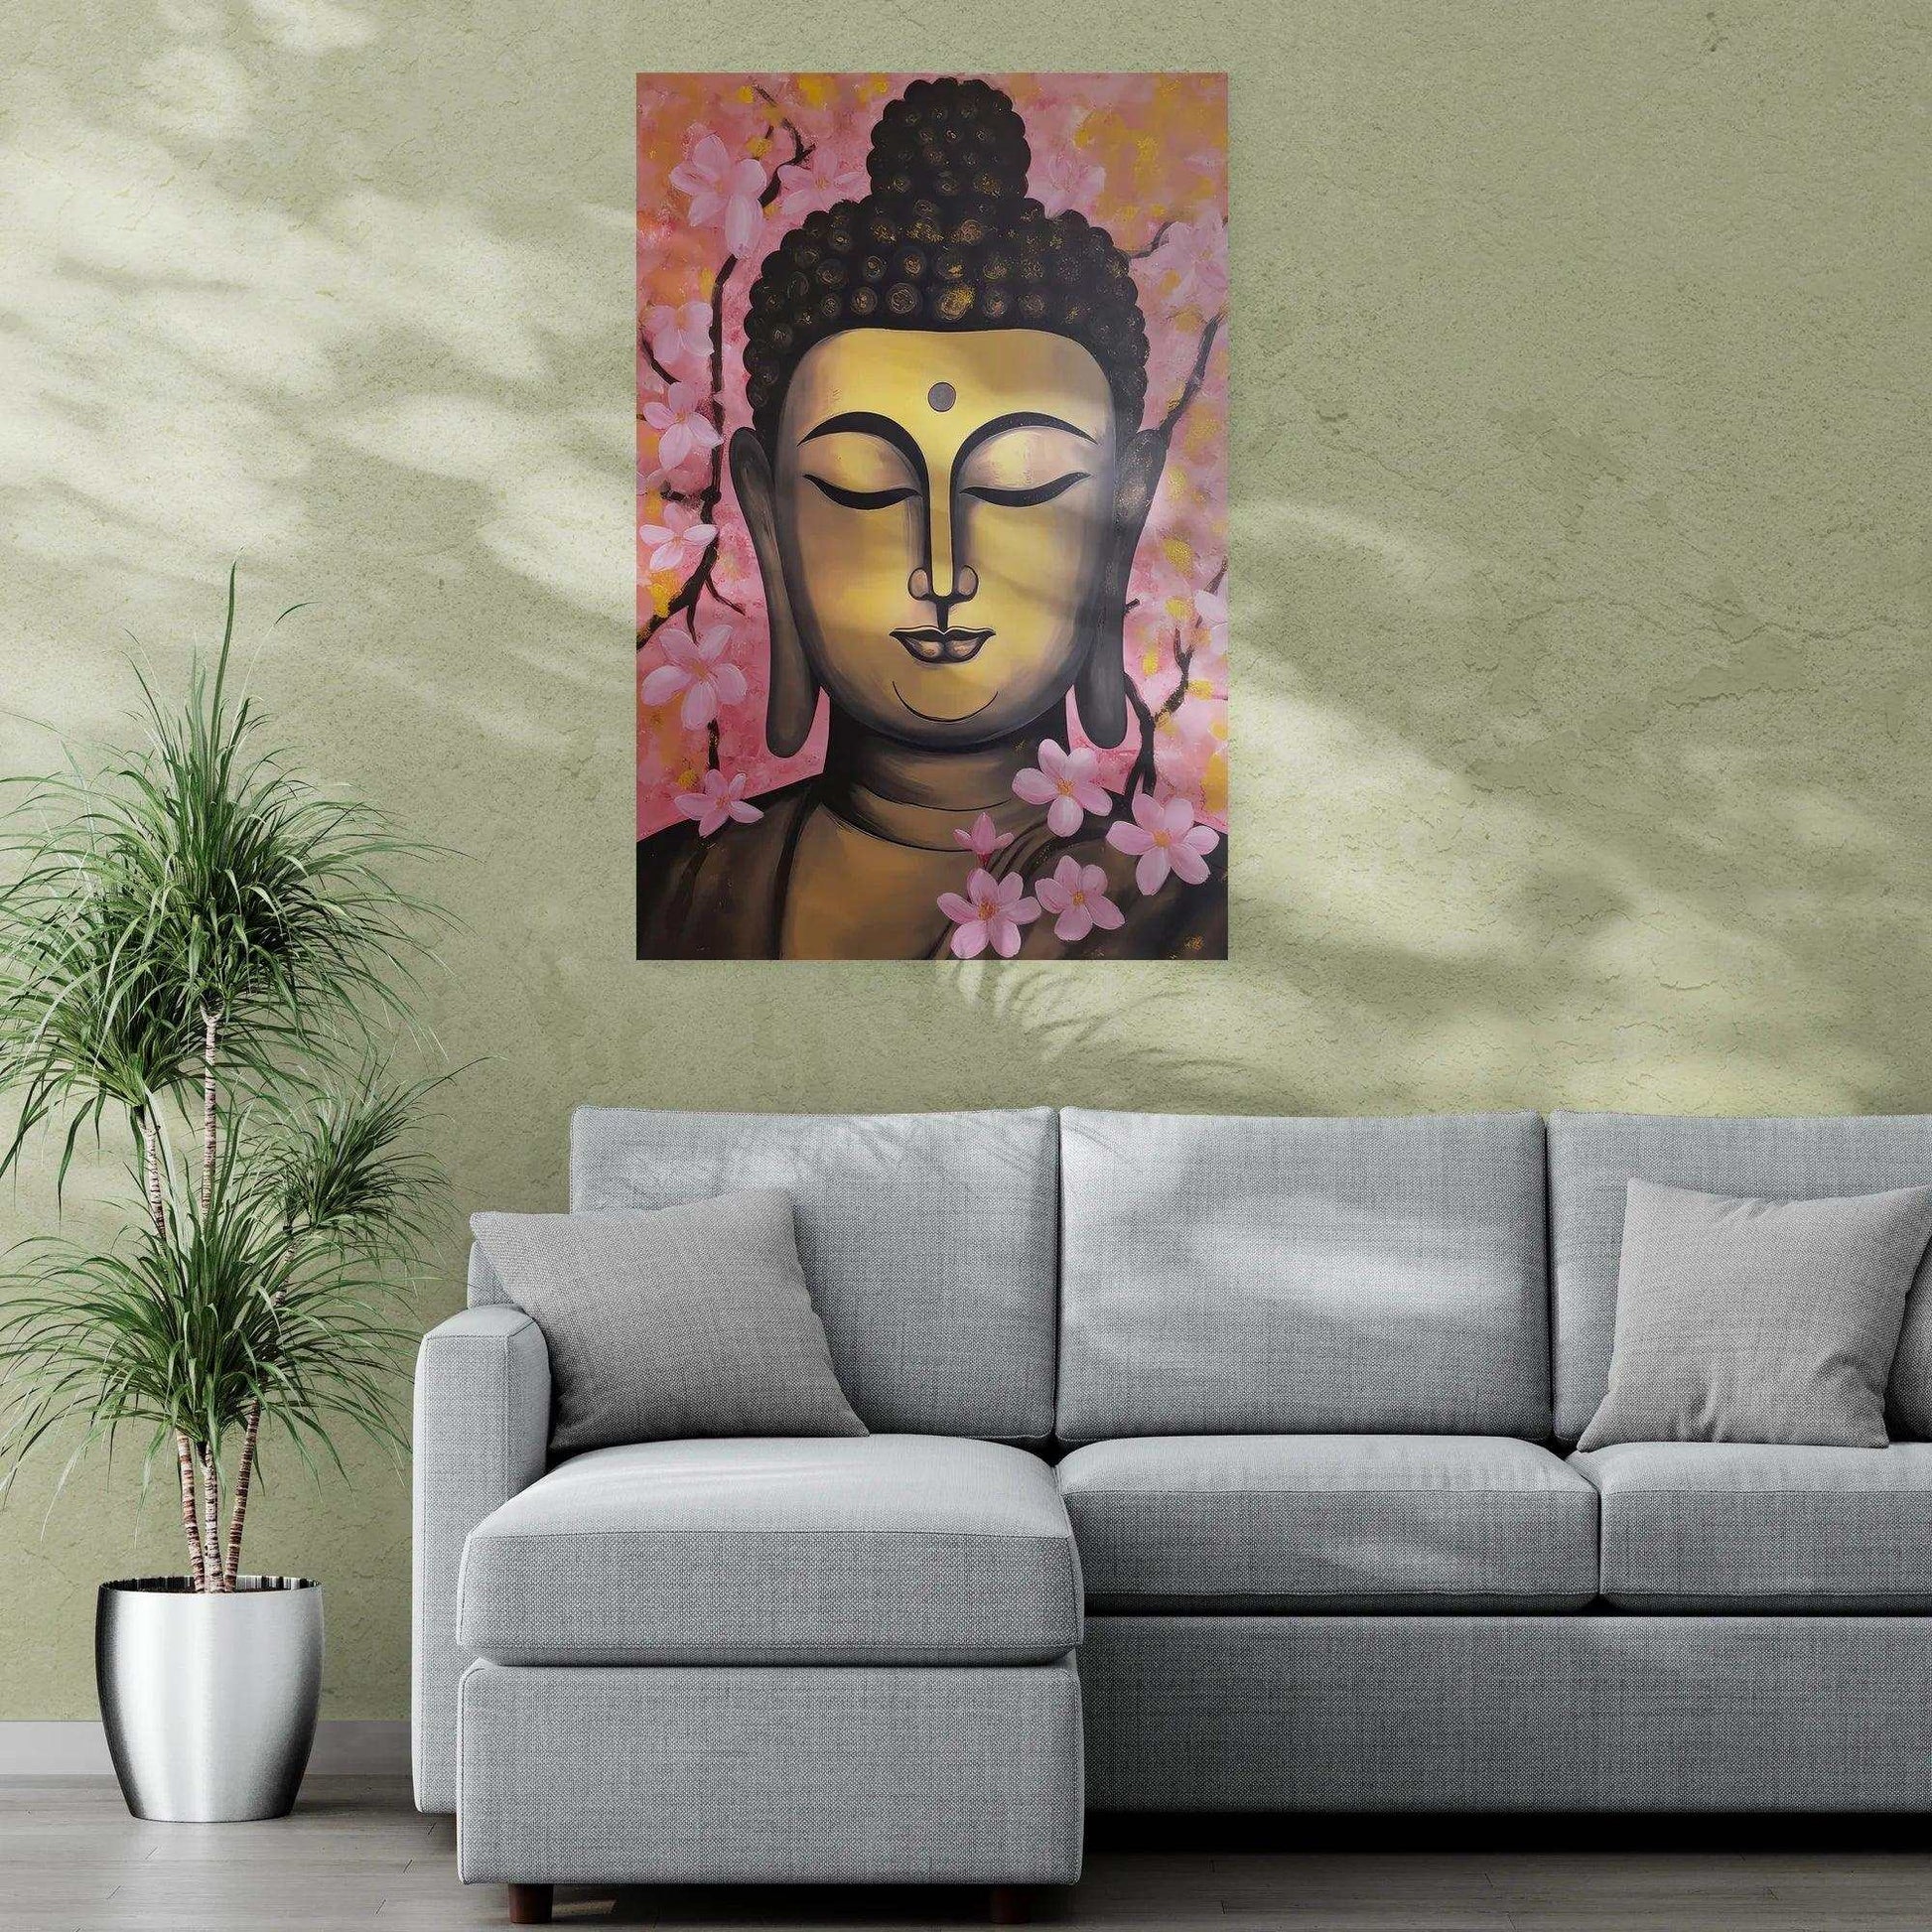 Warm-toned Buddha painting with a serene expression, framed by delicate pink cherry blossoms, creating a focal point above a gray sectional sofa in a room with a textured wall and a tall potted plant, contributing to a peaceful and harmonious decor.